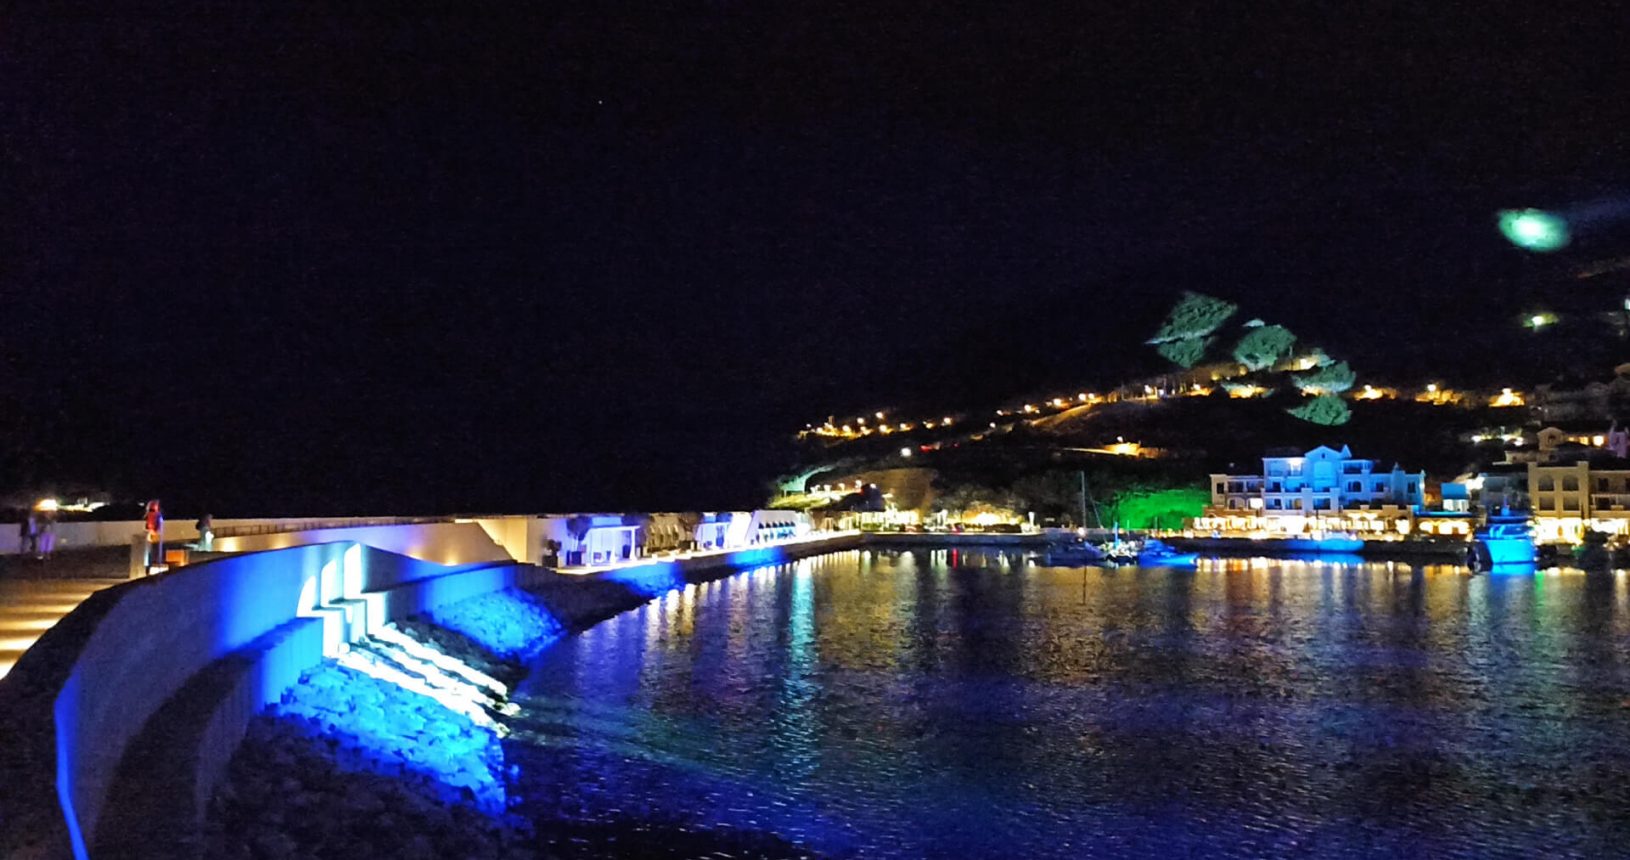 Music night light show at Lustica bay